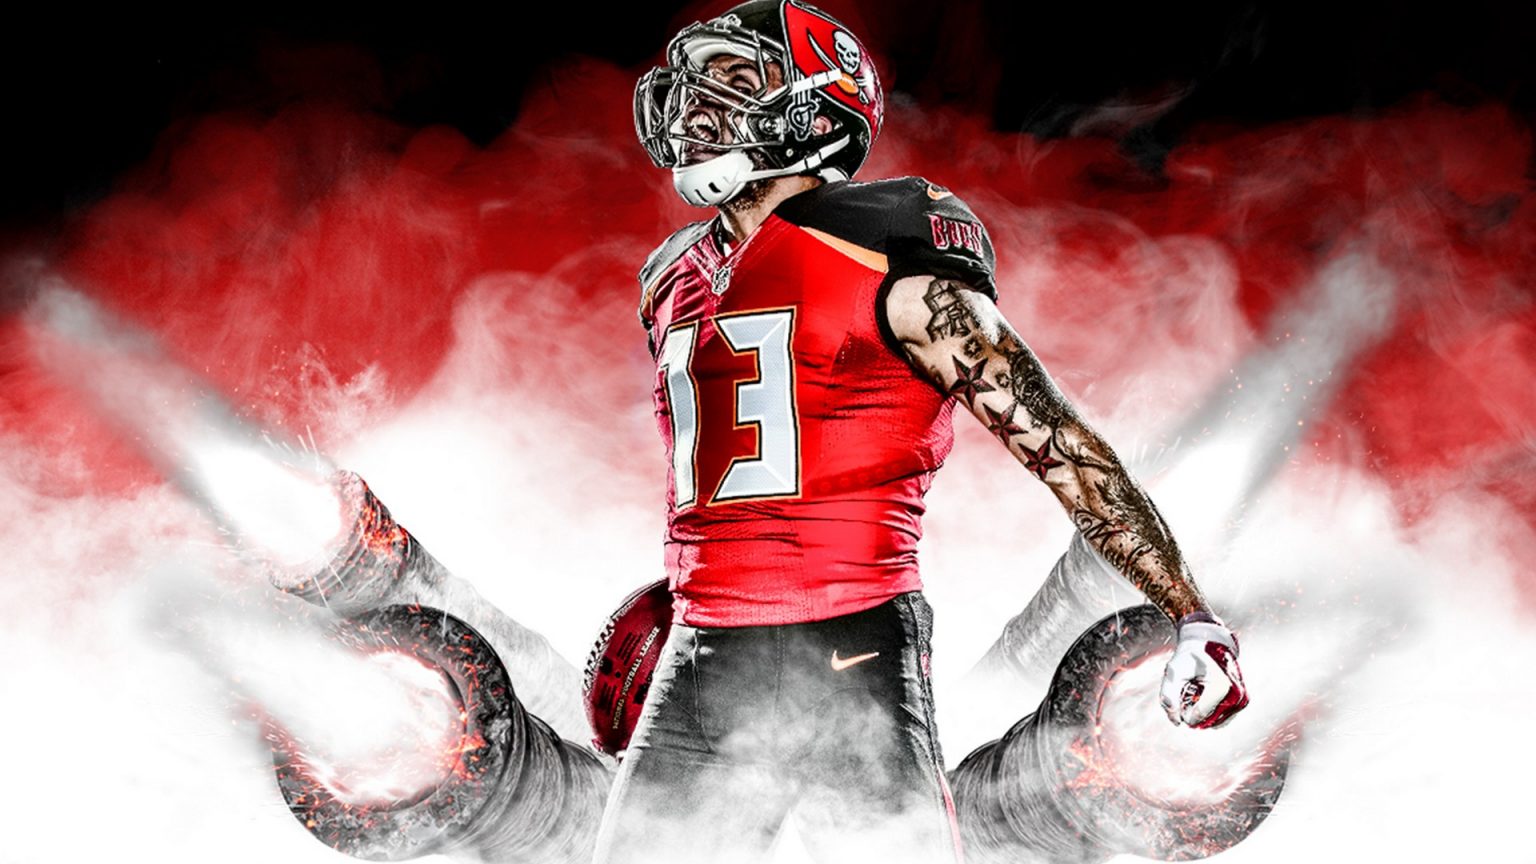 Tampa Bay Buccaneers Backgrounds Hd Best Nfl Football Wallpapers ...